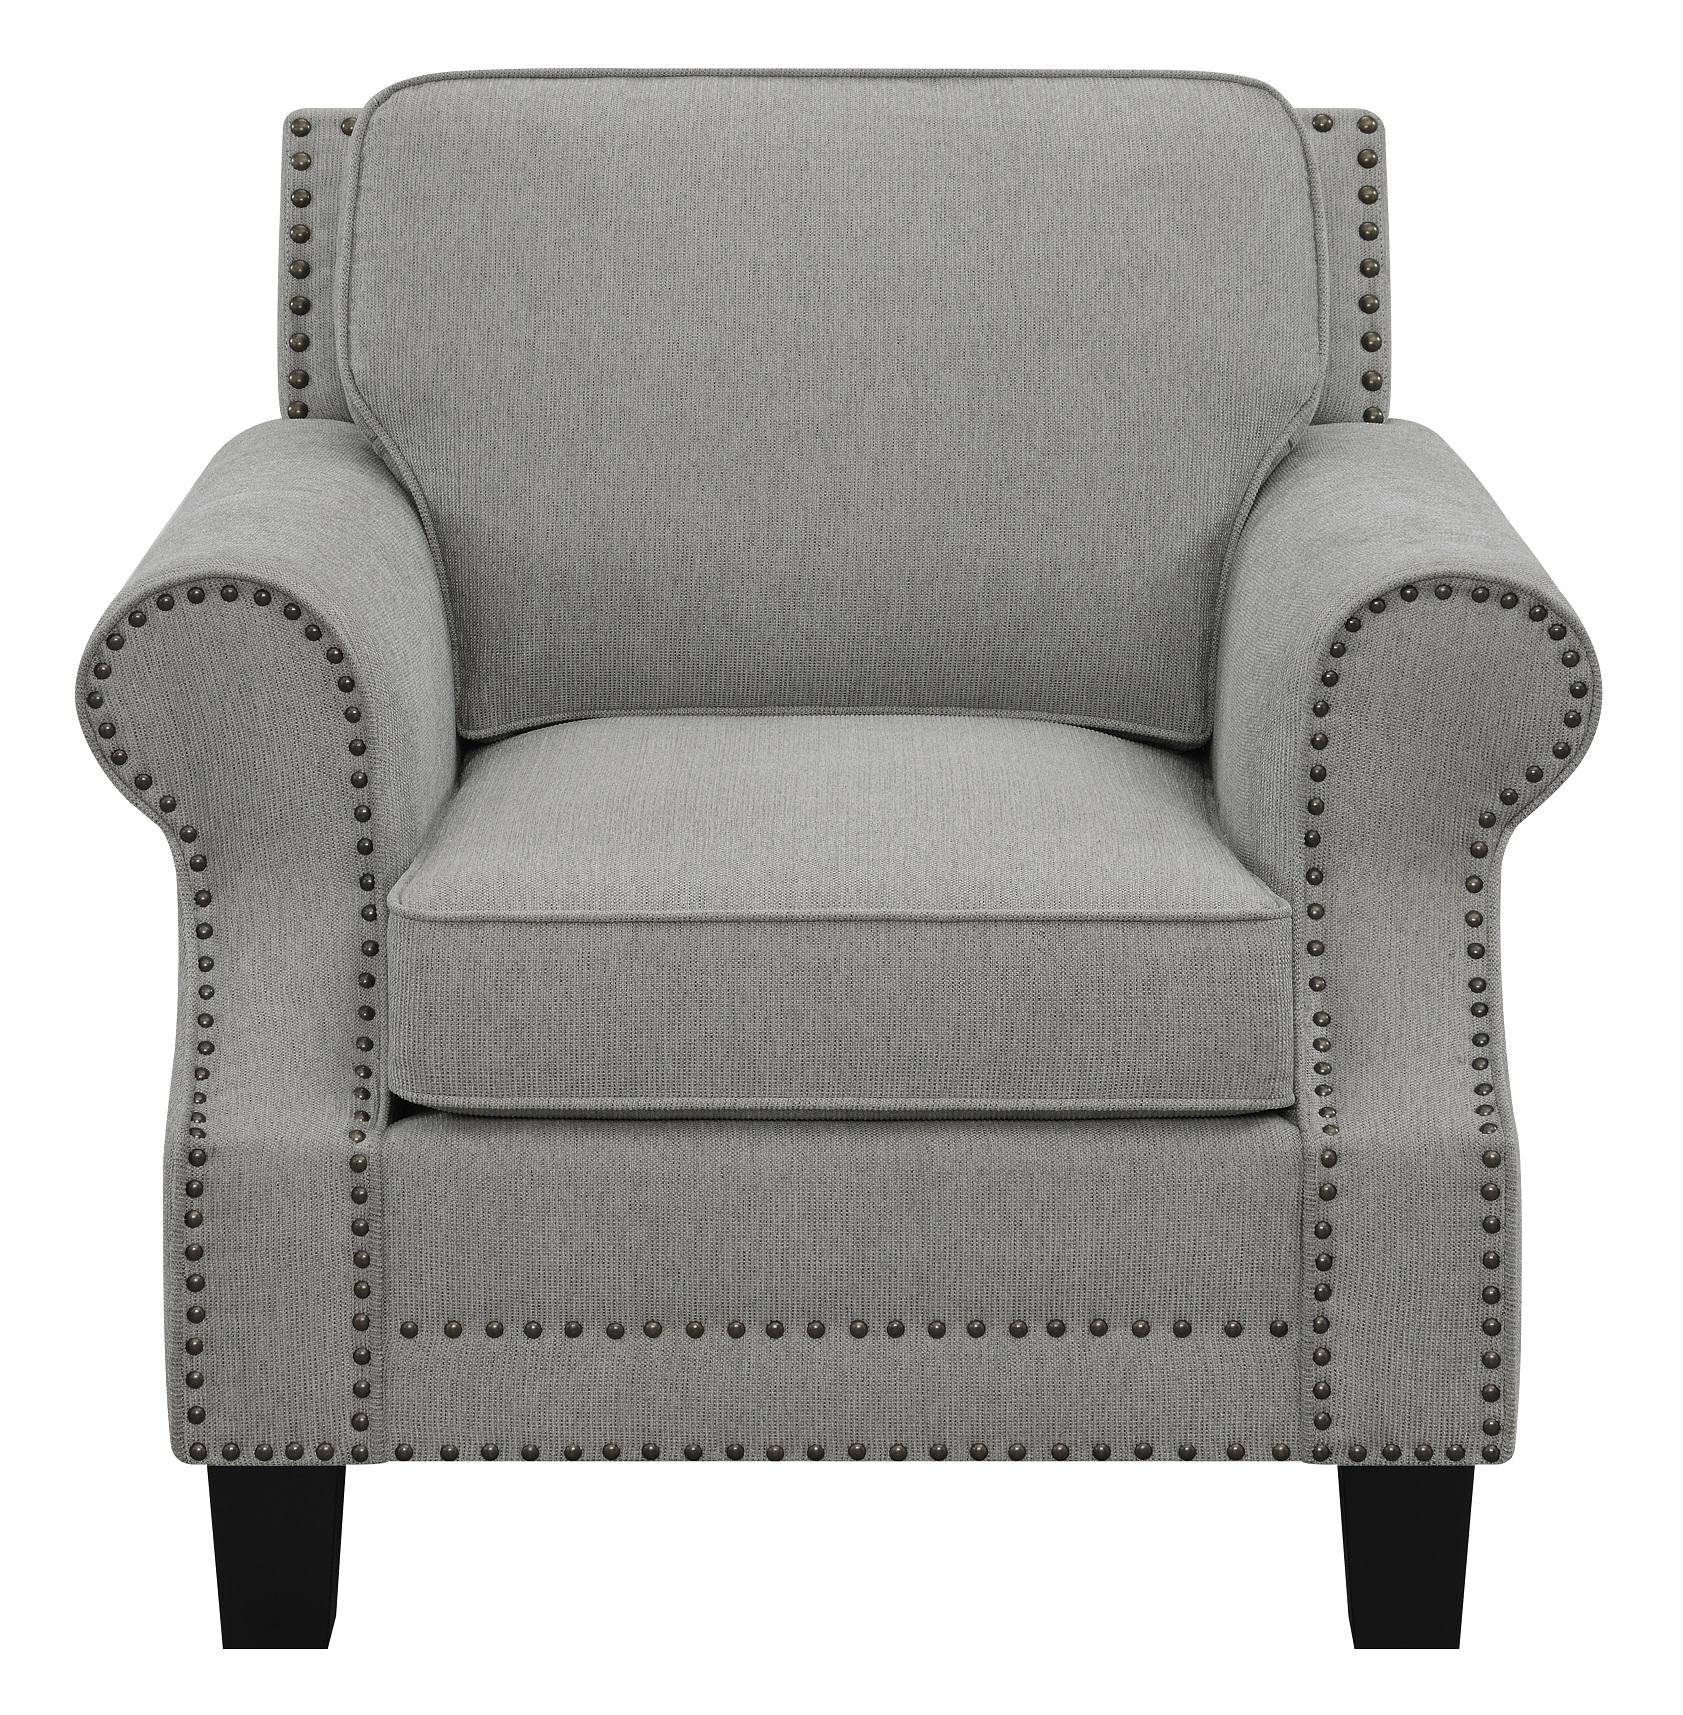 

    
Transitional Gray Woven Fabric Upholstery Arm Chair Coaster 506873 Sheldon
